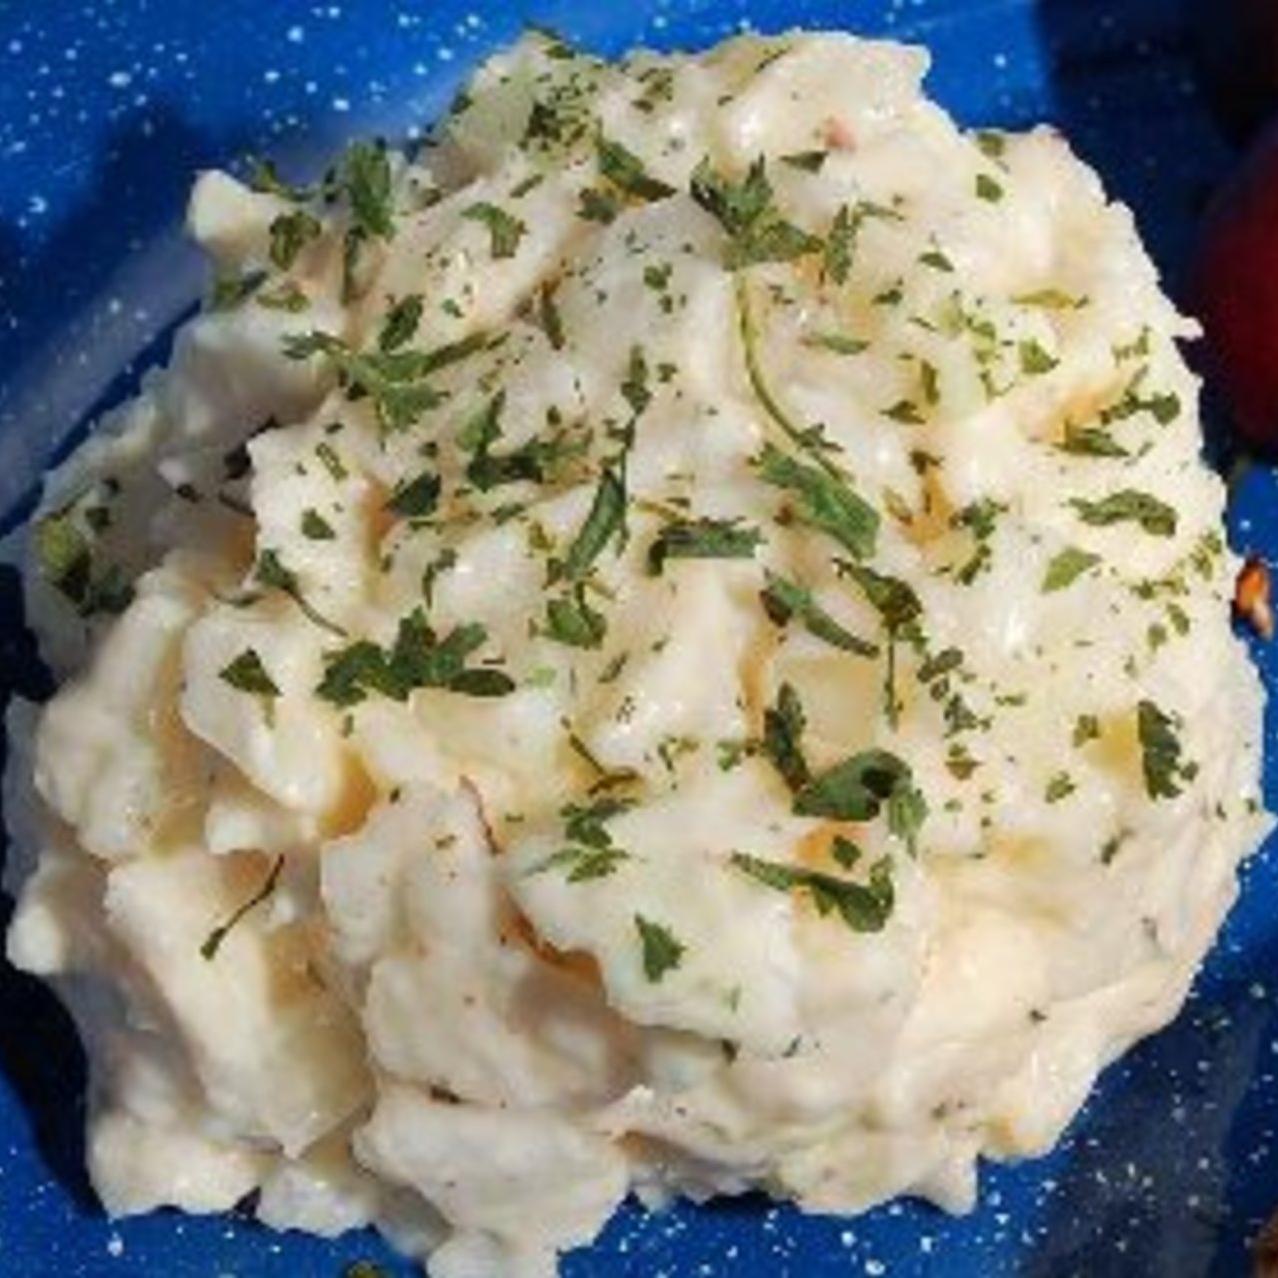  Perfectly boiled potatoes with a savory dressing